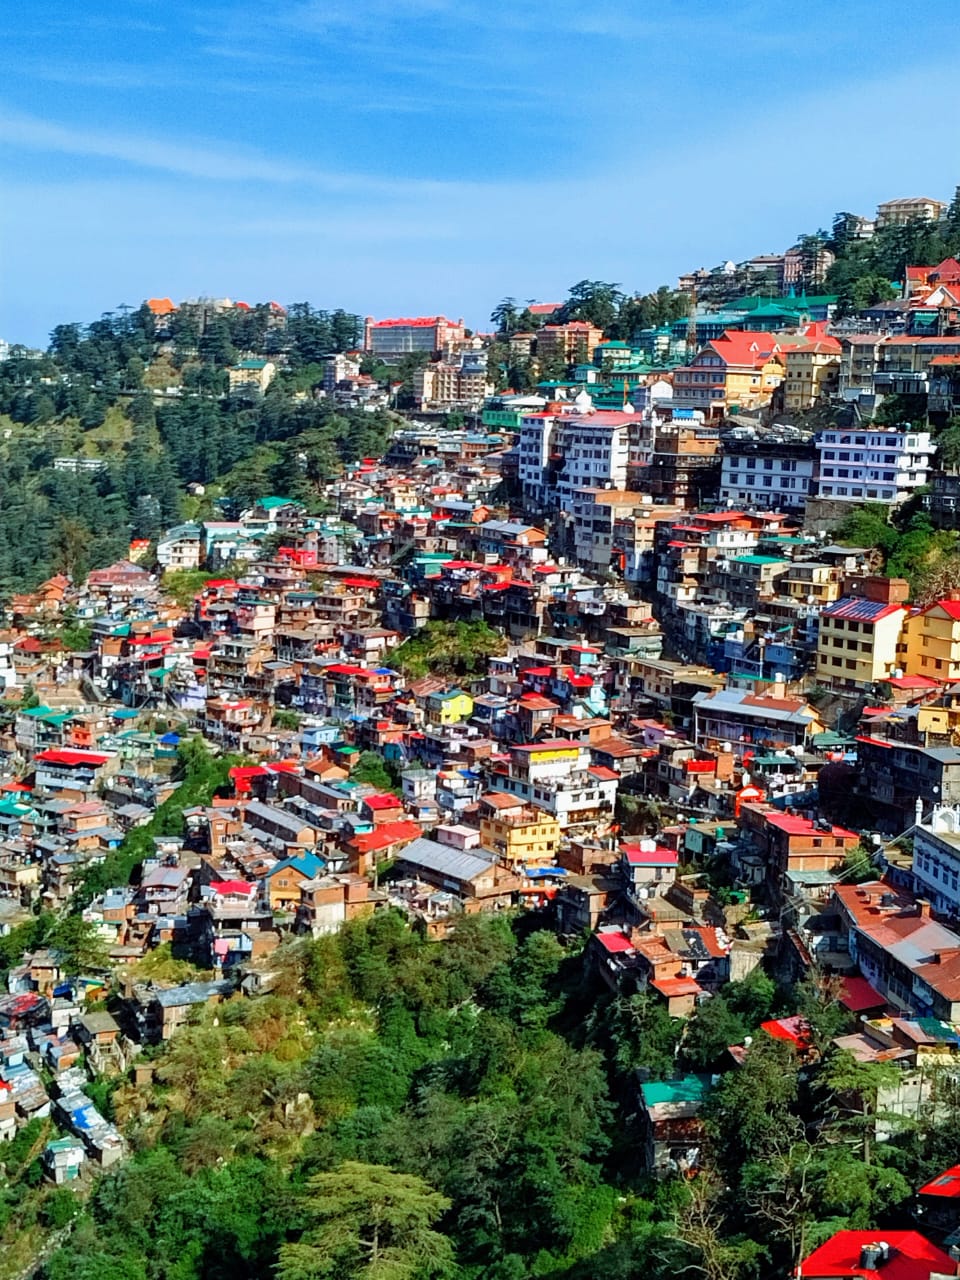 Enchanting Shimla: A 3-Day Itinerary to Make the Most of Your Trip